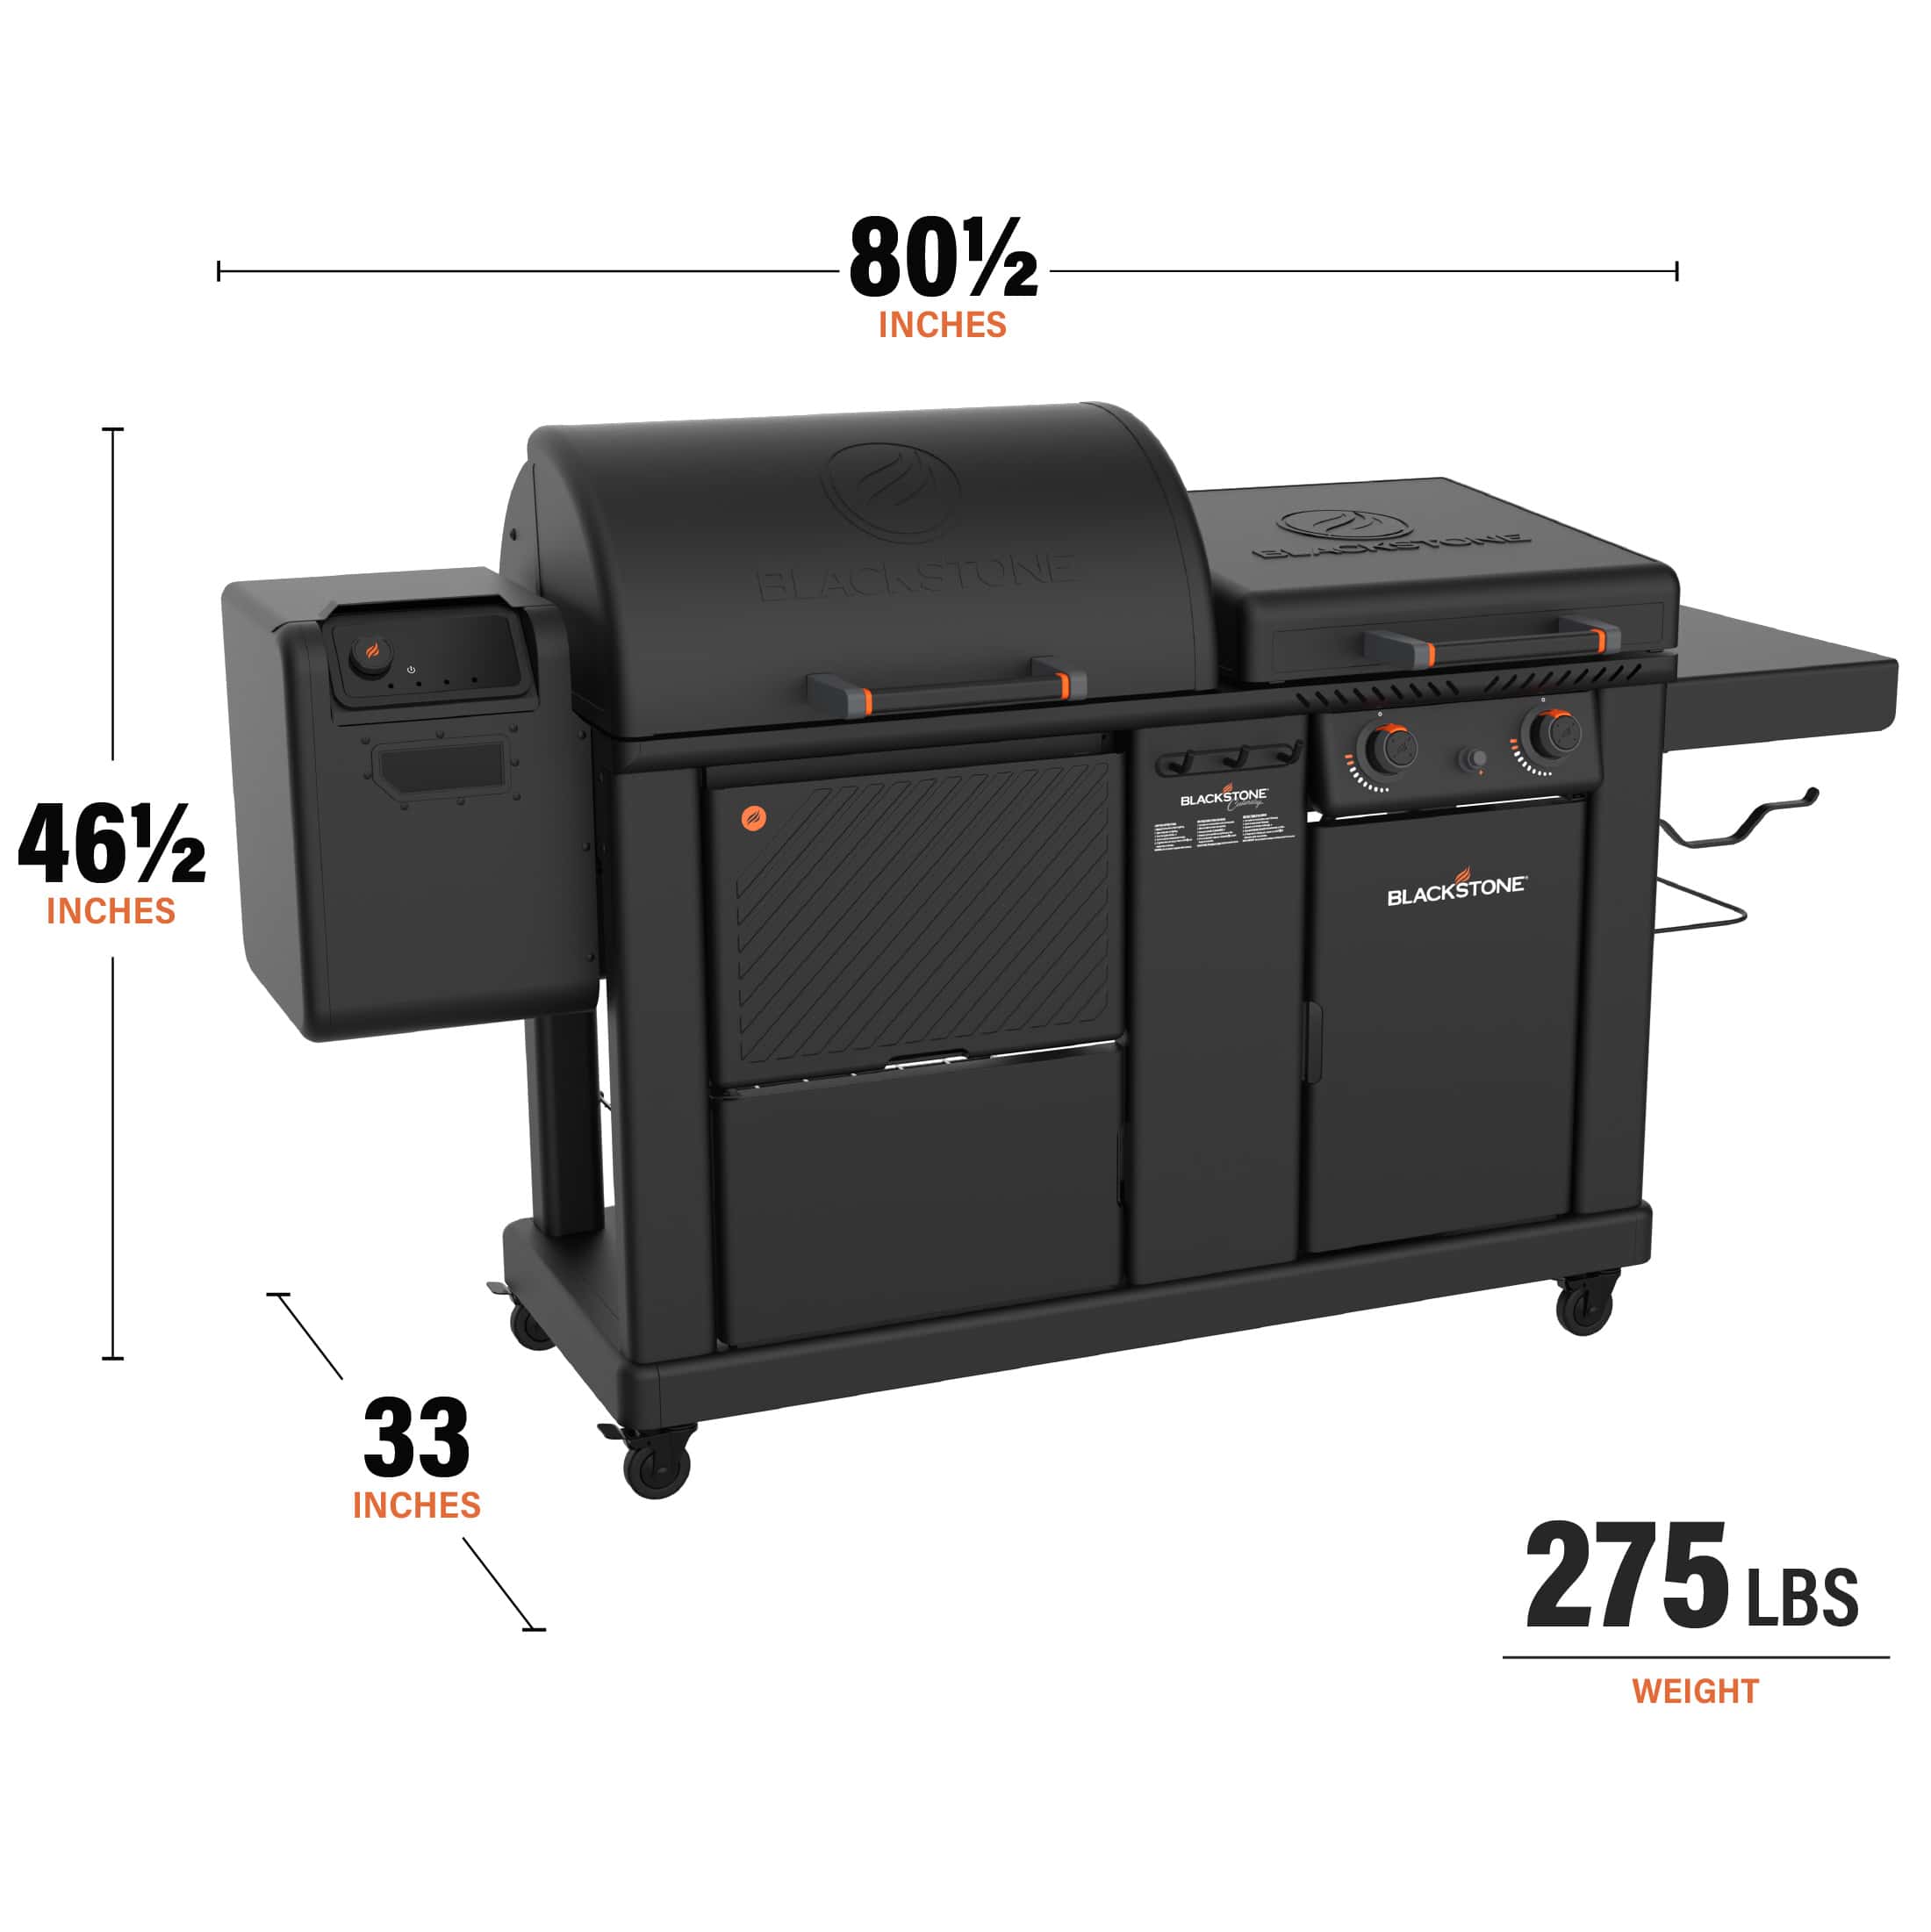 The dimensions of blackstones pellet grill and griddle combo